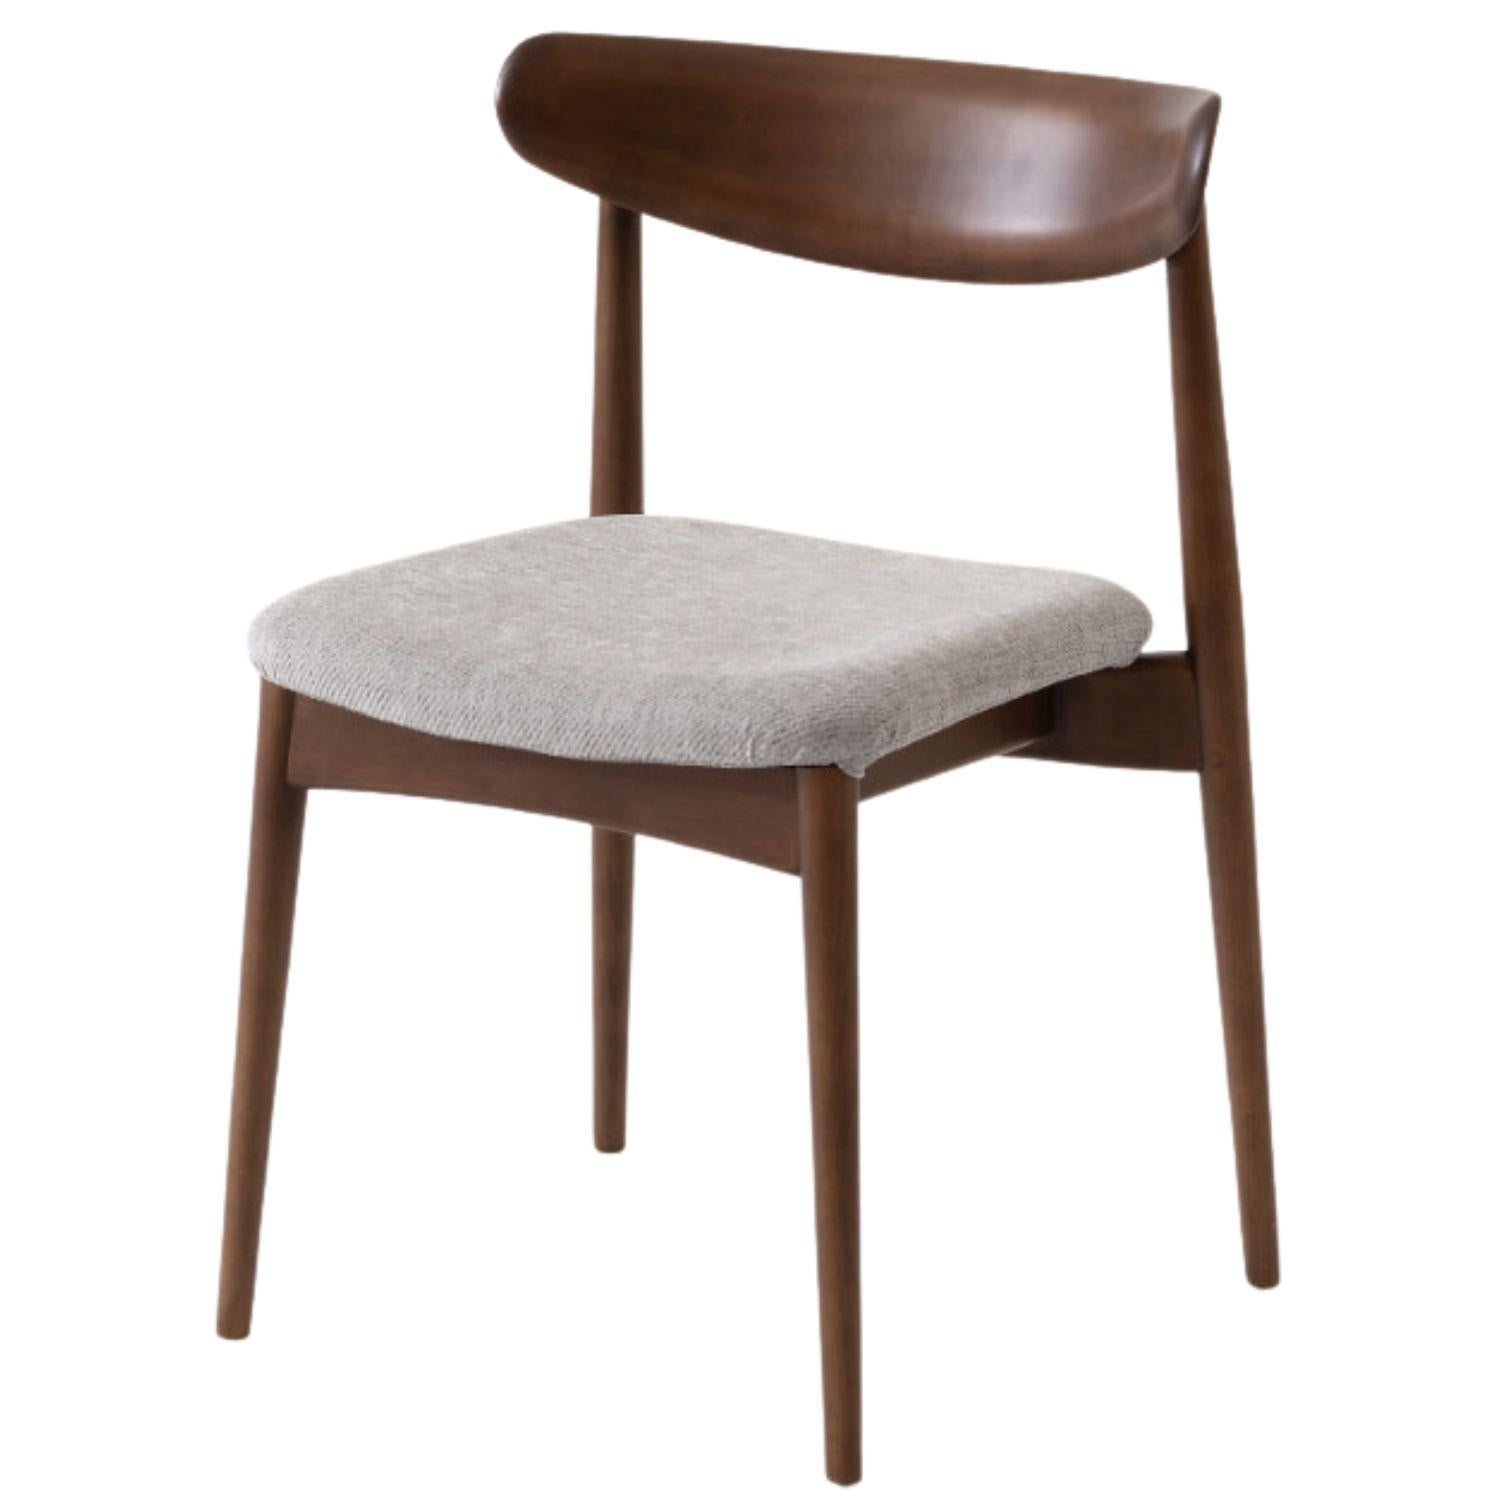 Contemporary Motomi Kawakami 'Seoto KD201' Dining Chair in Oak and Upholstery for Hida For Sale